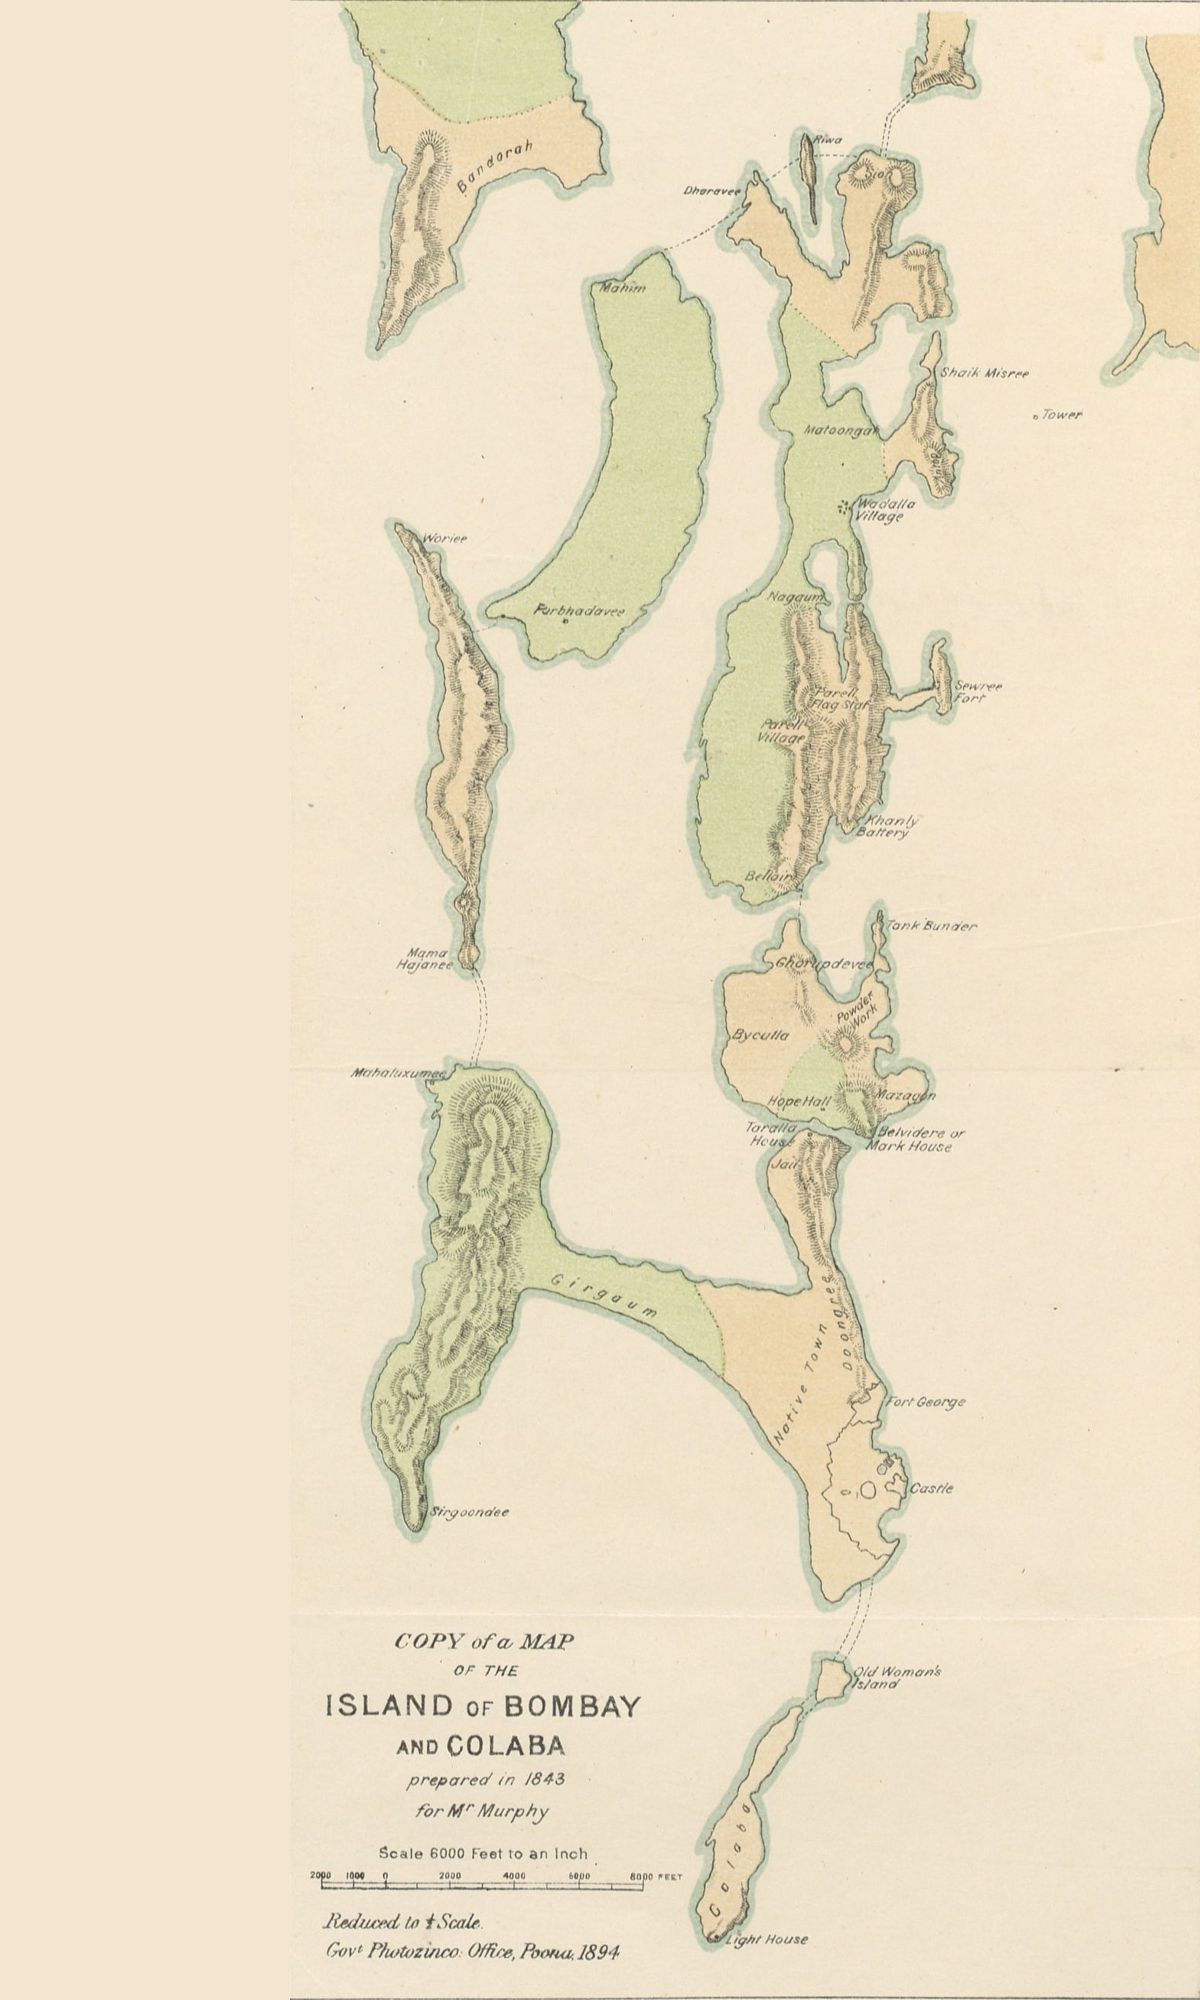 Bombay and Colaba, 1843